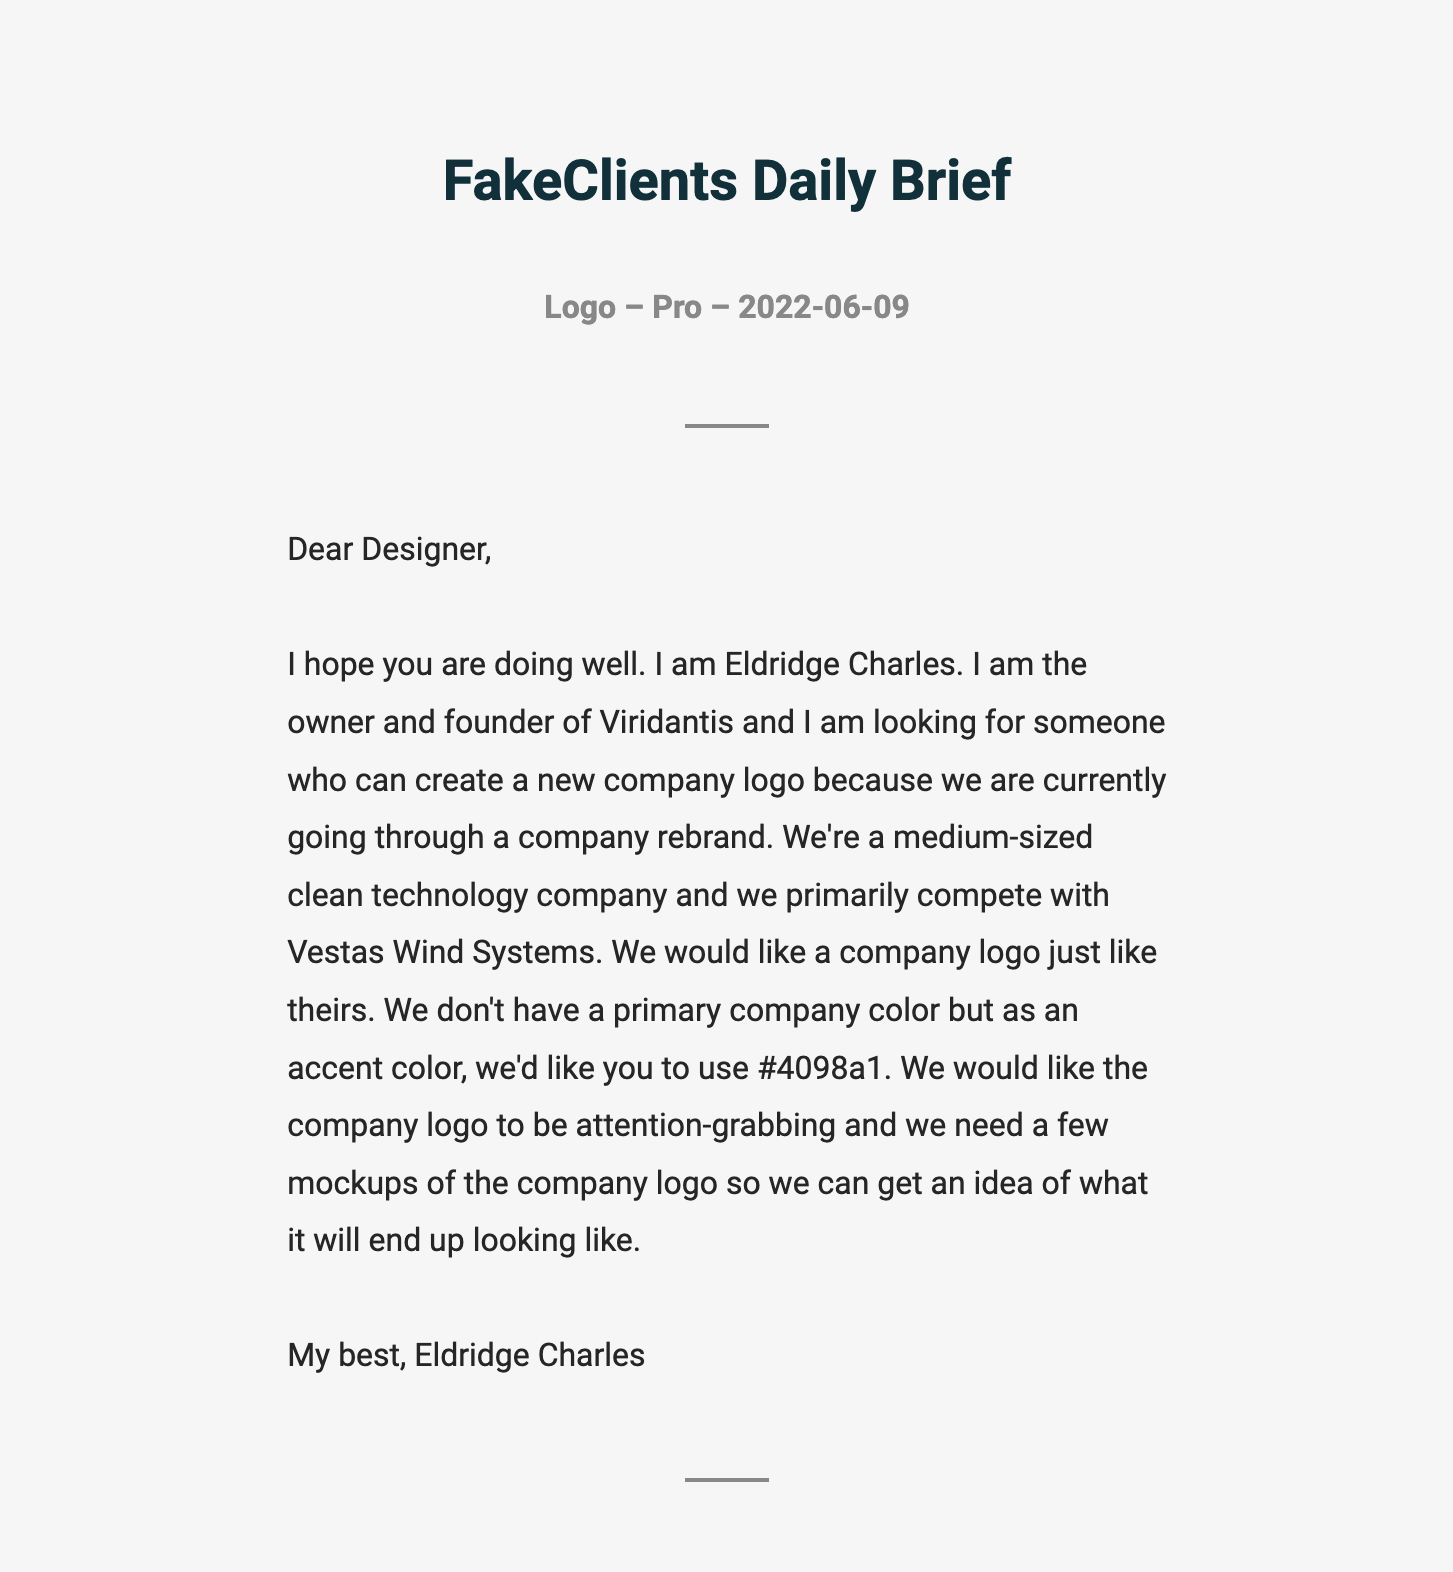 FakeClients Daily Design Brief - FakeClients